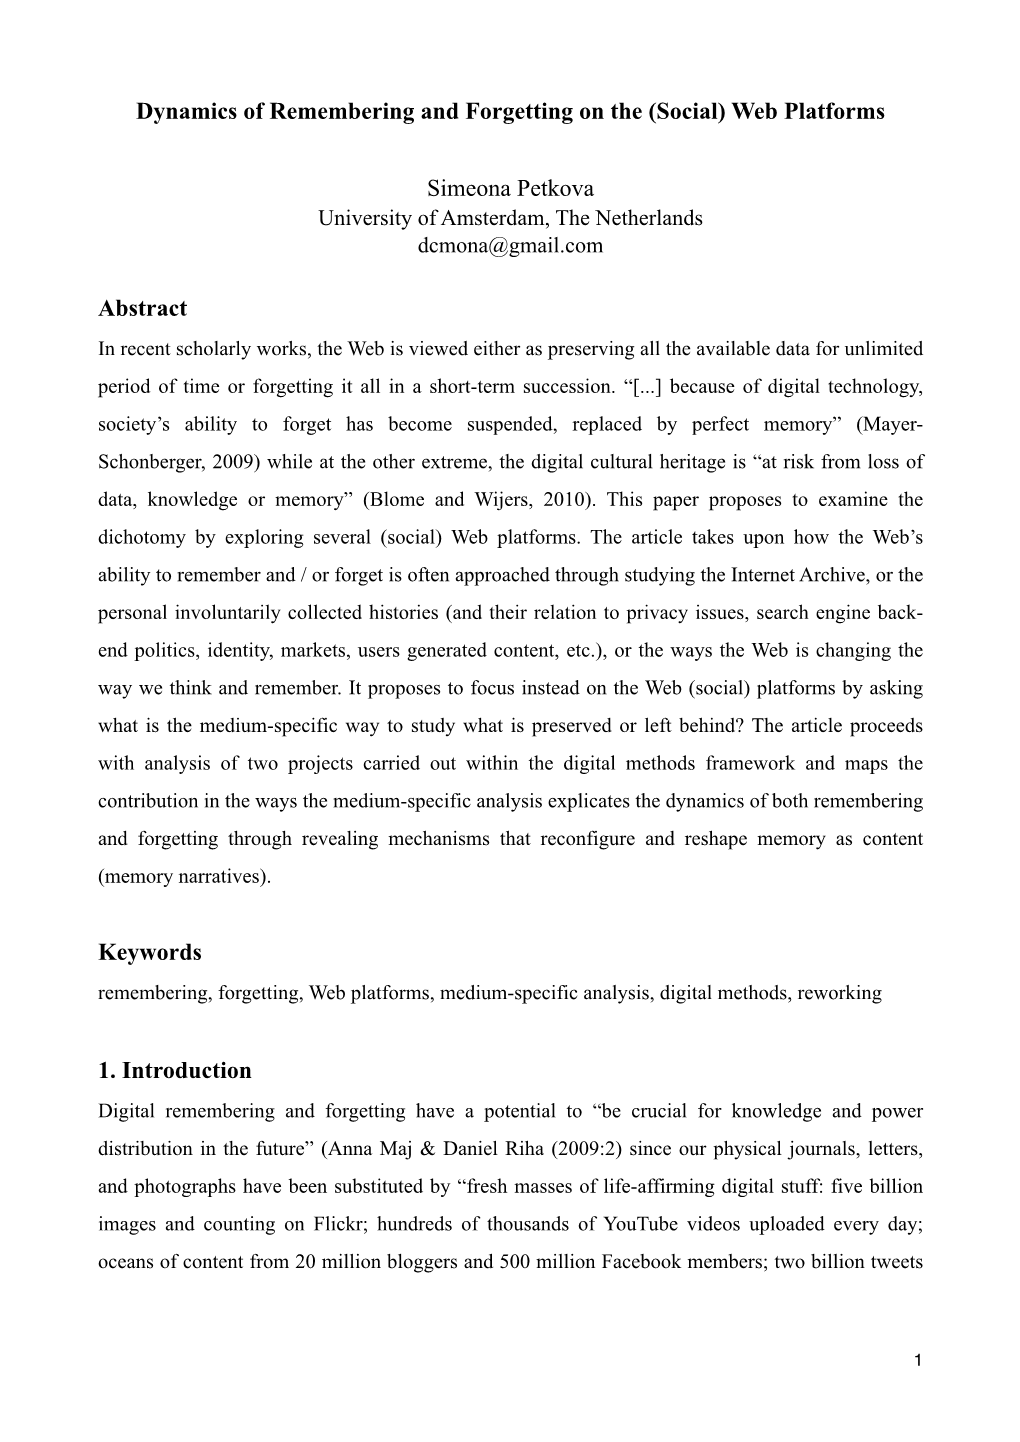 Dynamics of Remembering and Forgetting on the (Social) Web Platforms